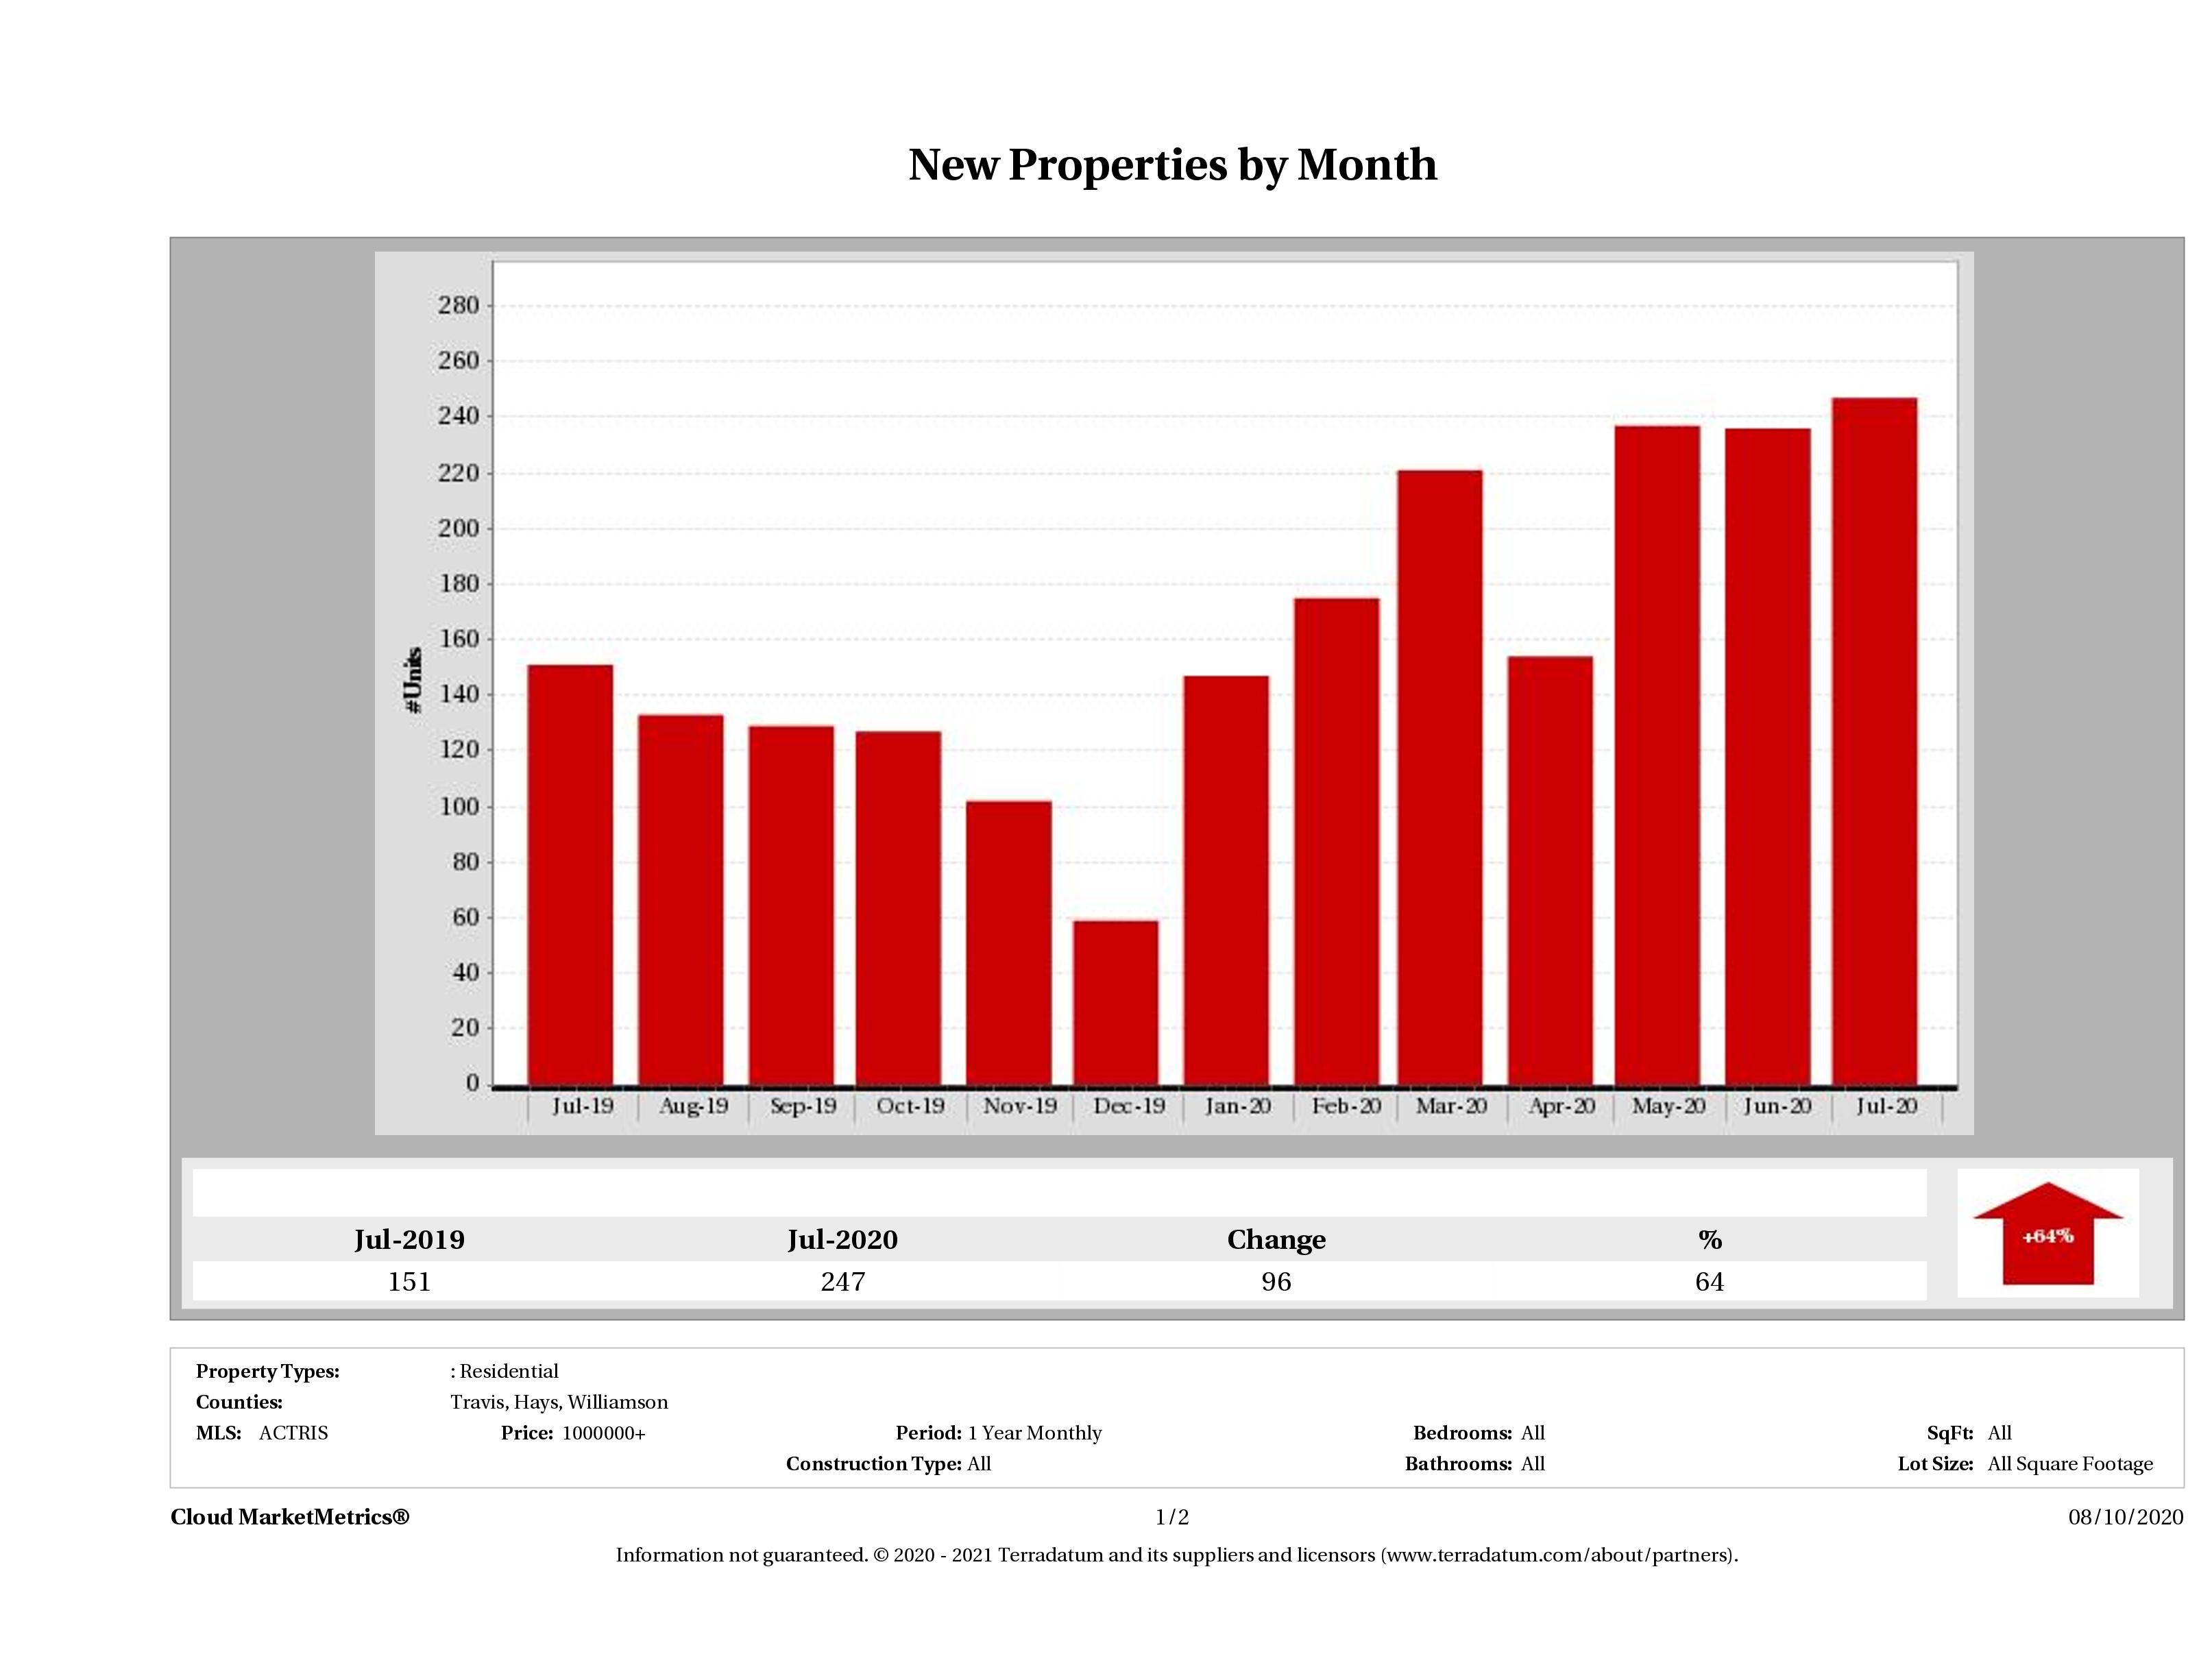 Austin number of new luxury listings July 2020